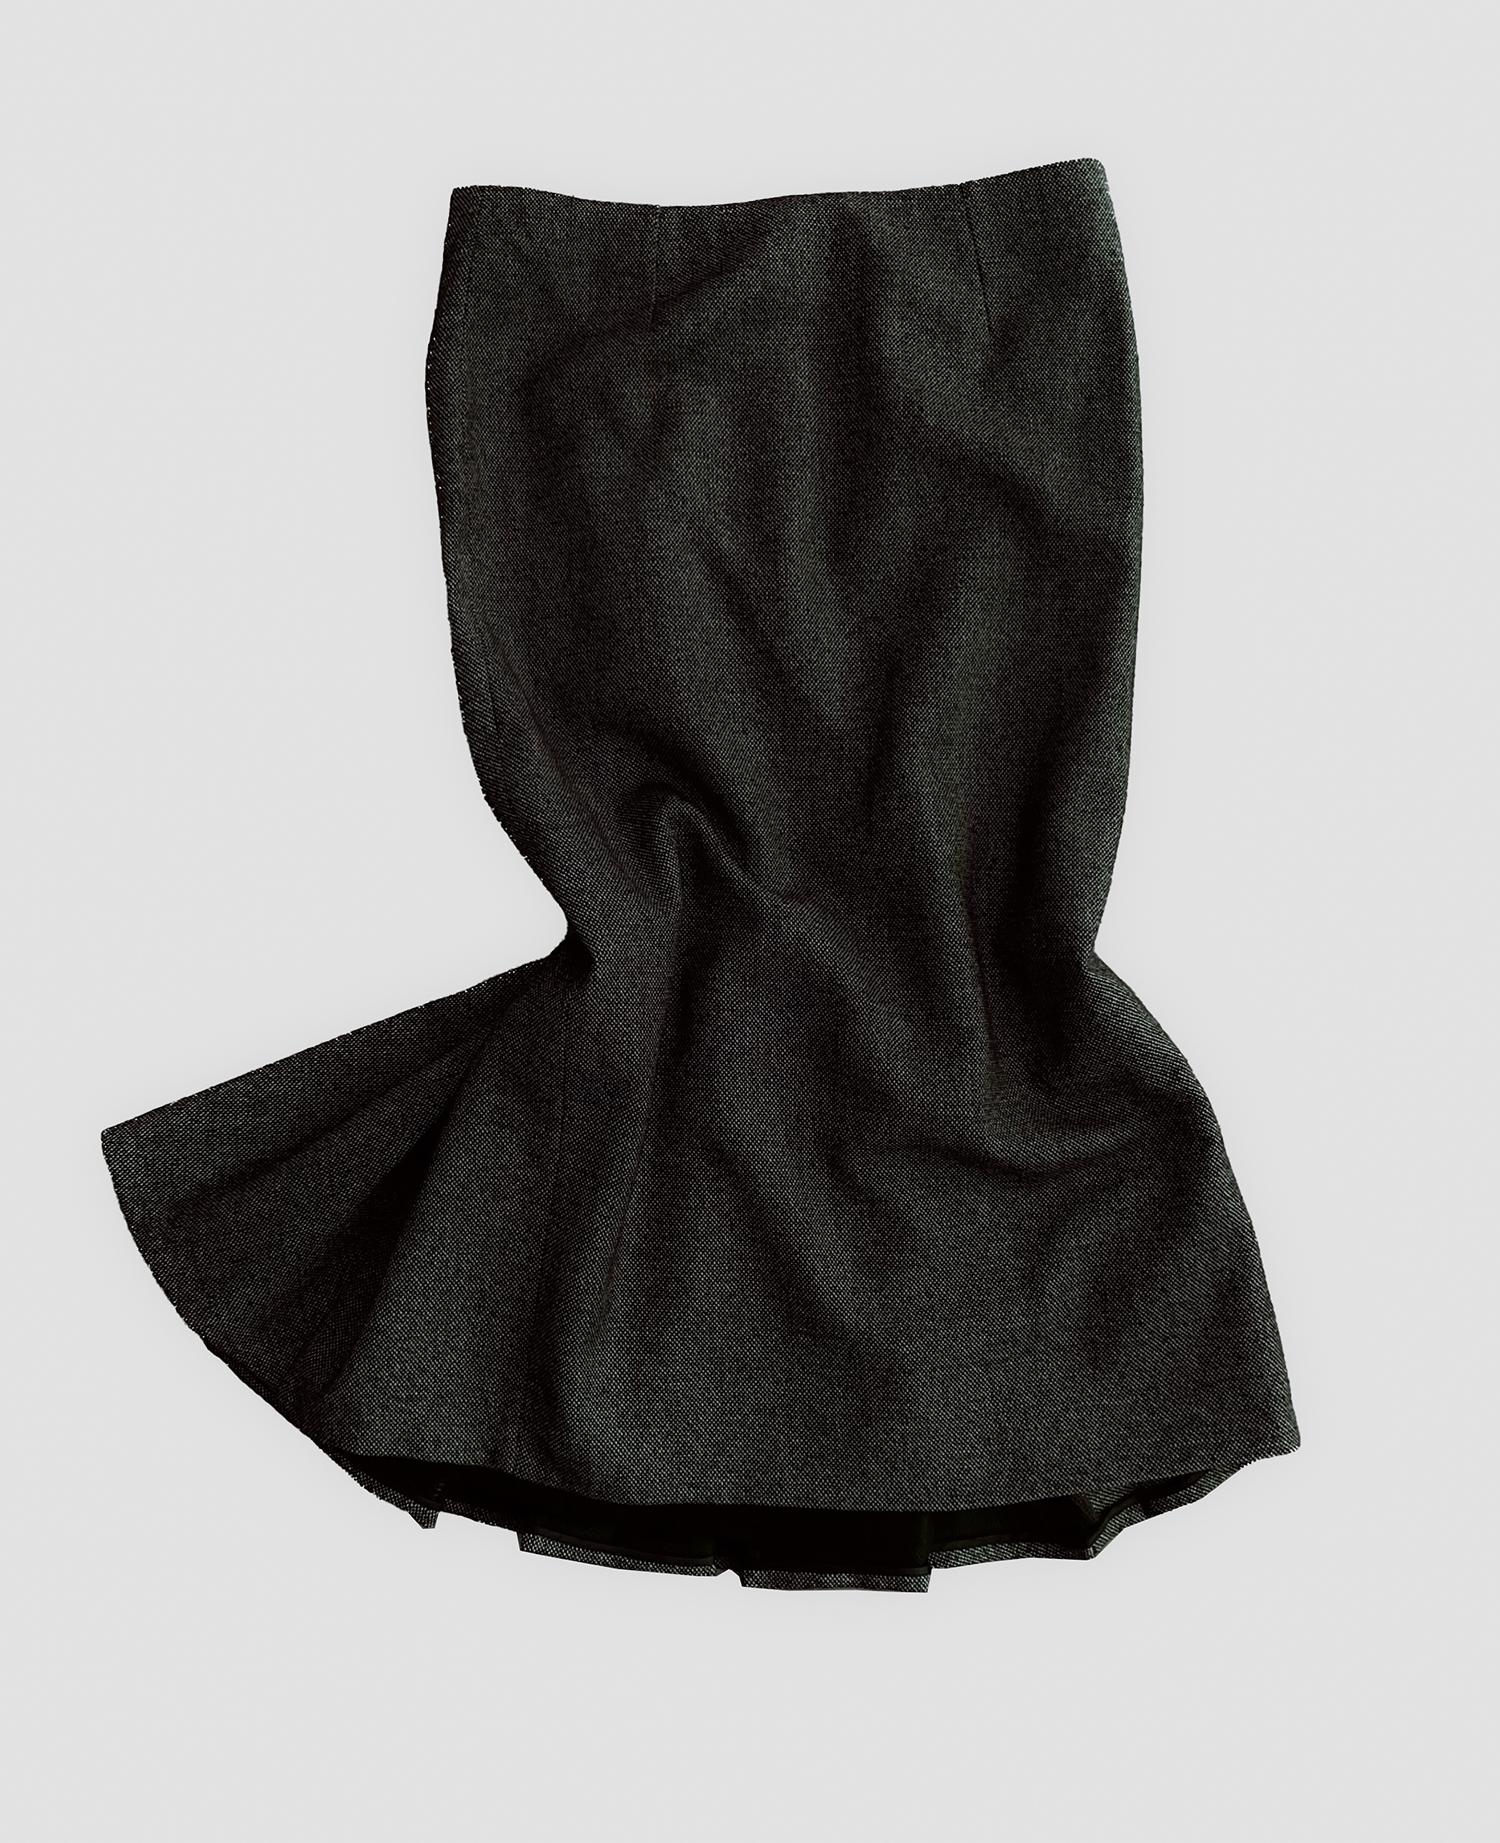 Alexander McQueen Archival FW 2005 'The Man Who Knew Too Much' Wool Skirt Suit For Sale 10